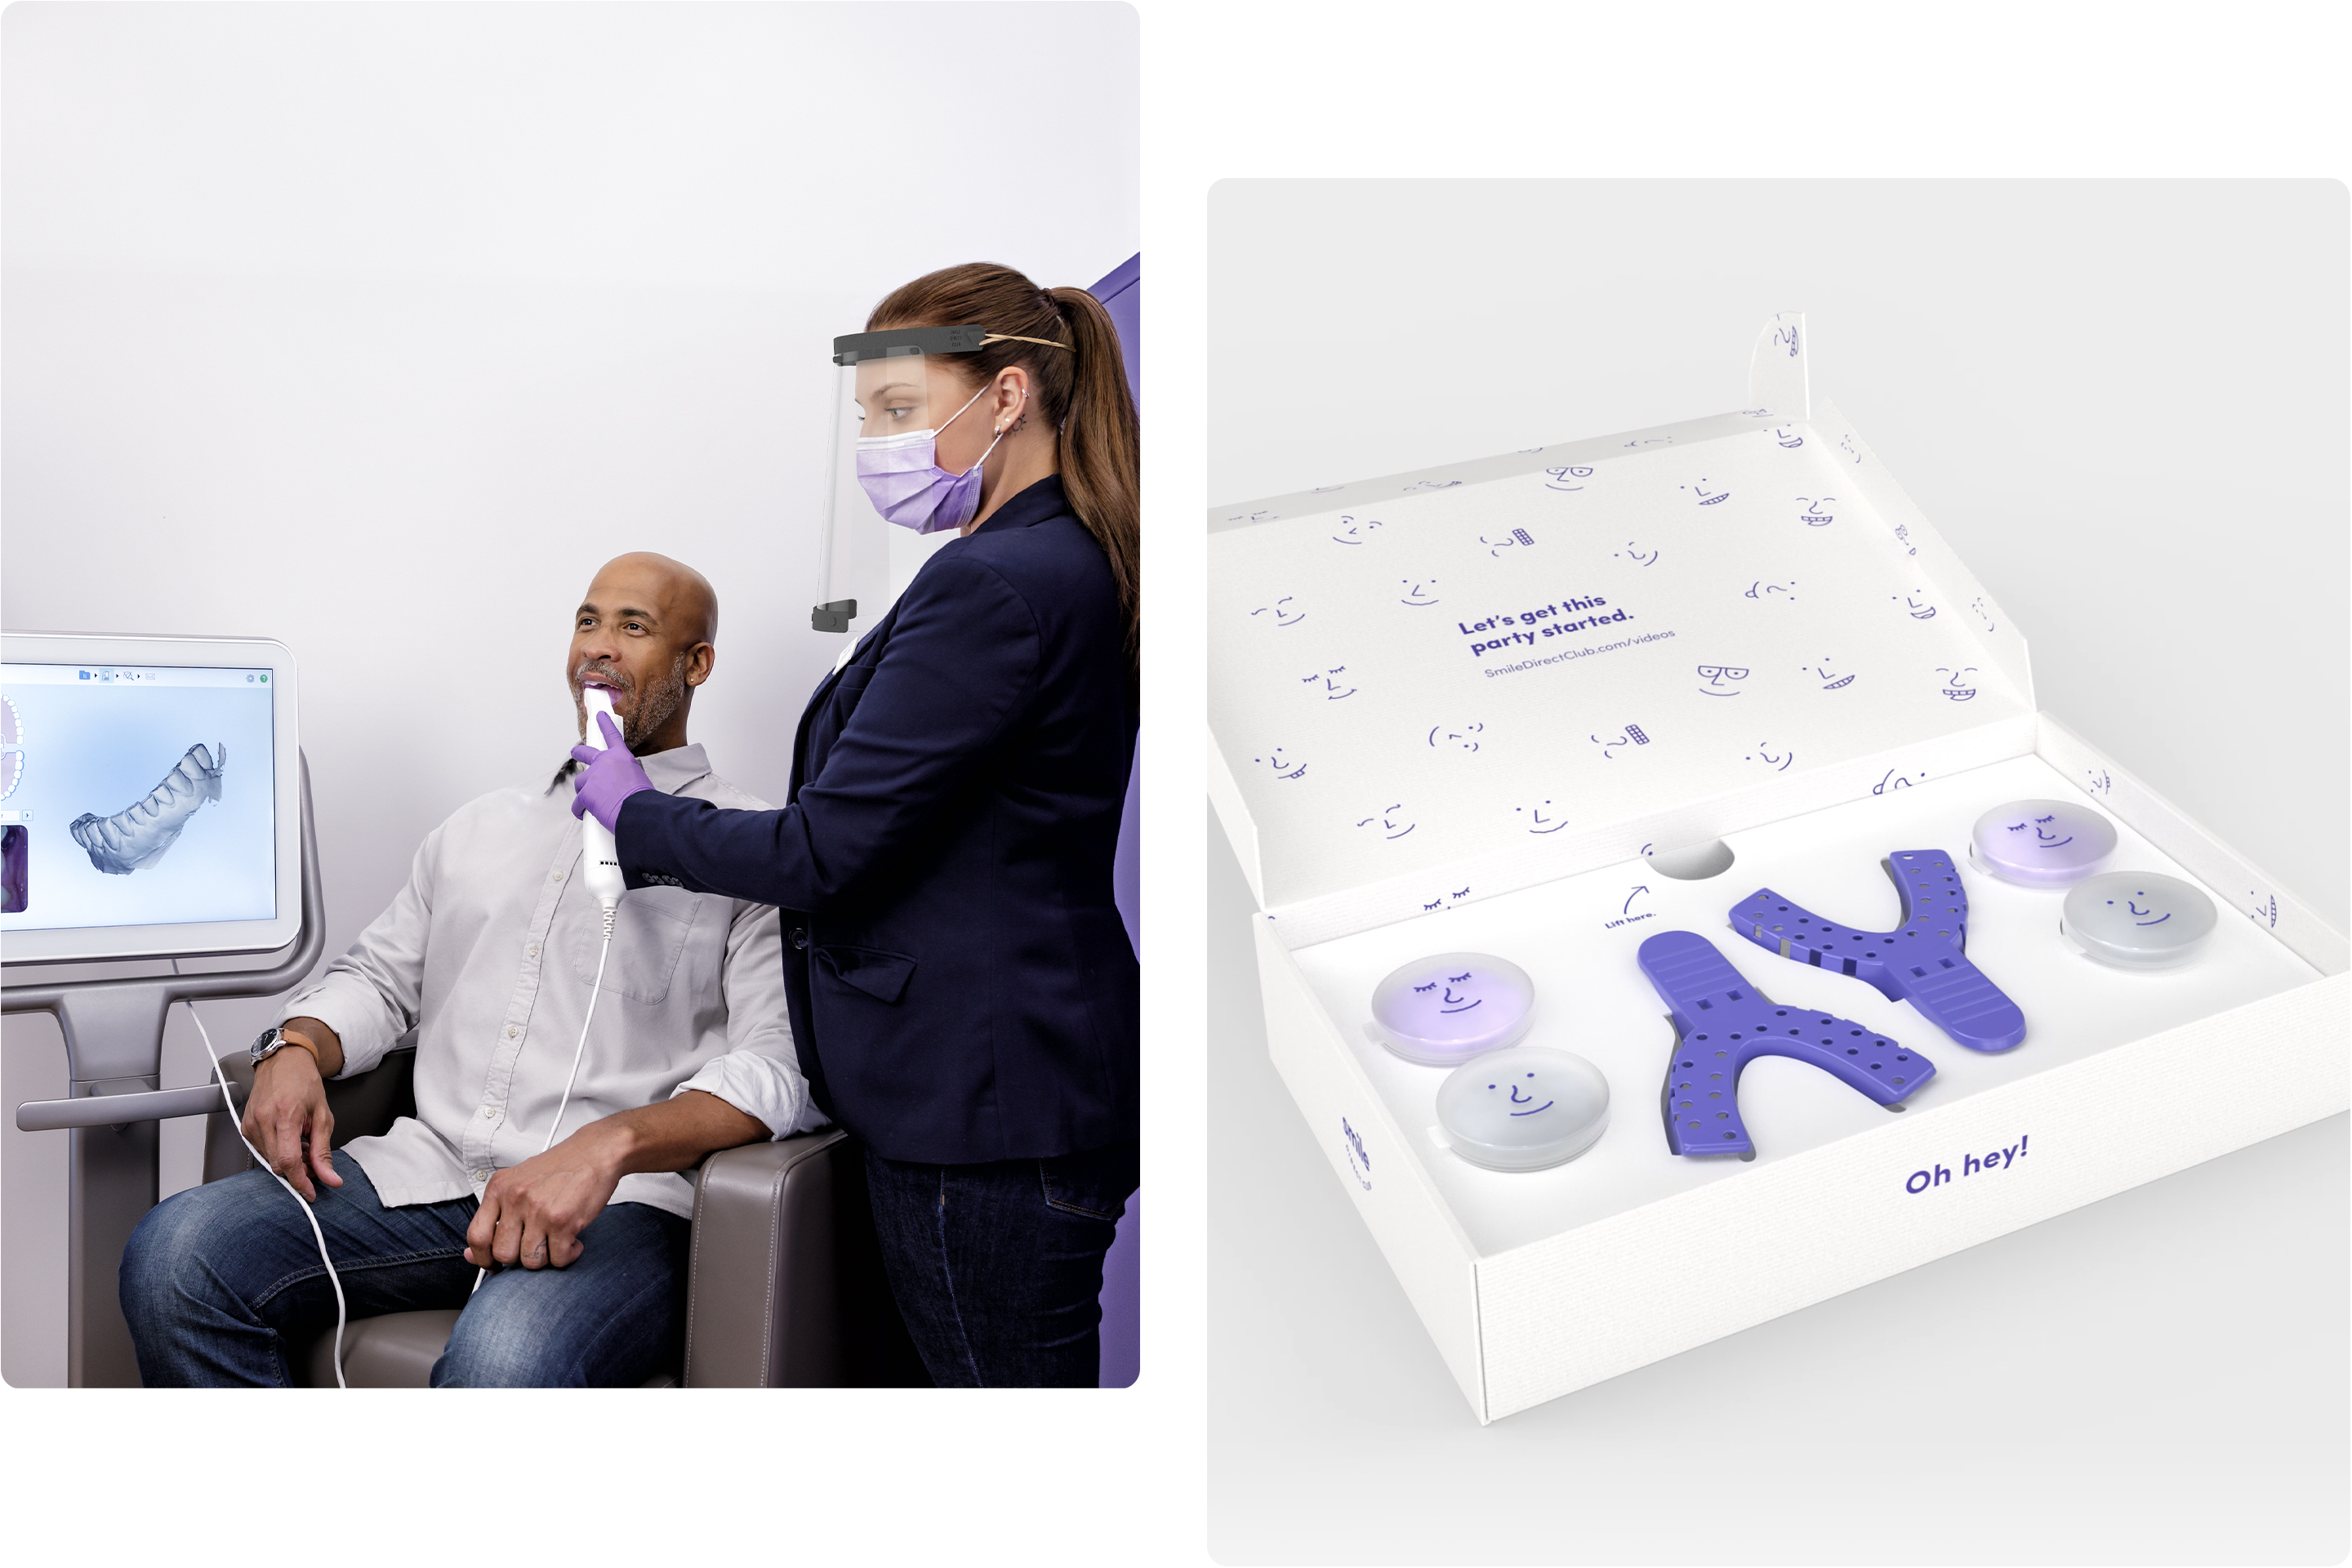 SmileDirectClub two ways to get started a 3d scan appointment in a smileshop or an at-home impression kit